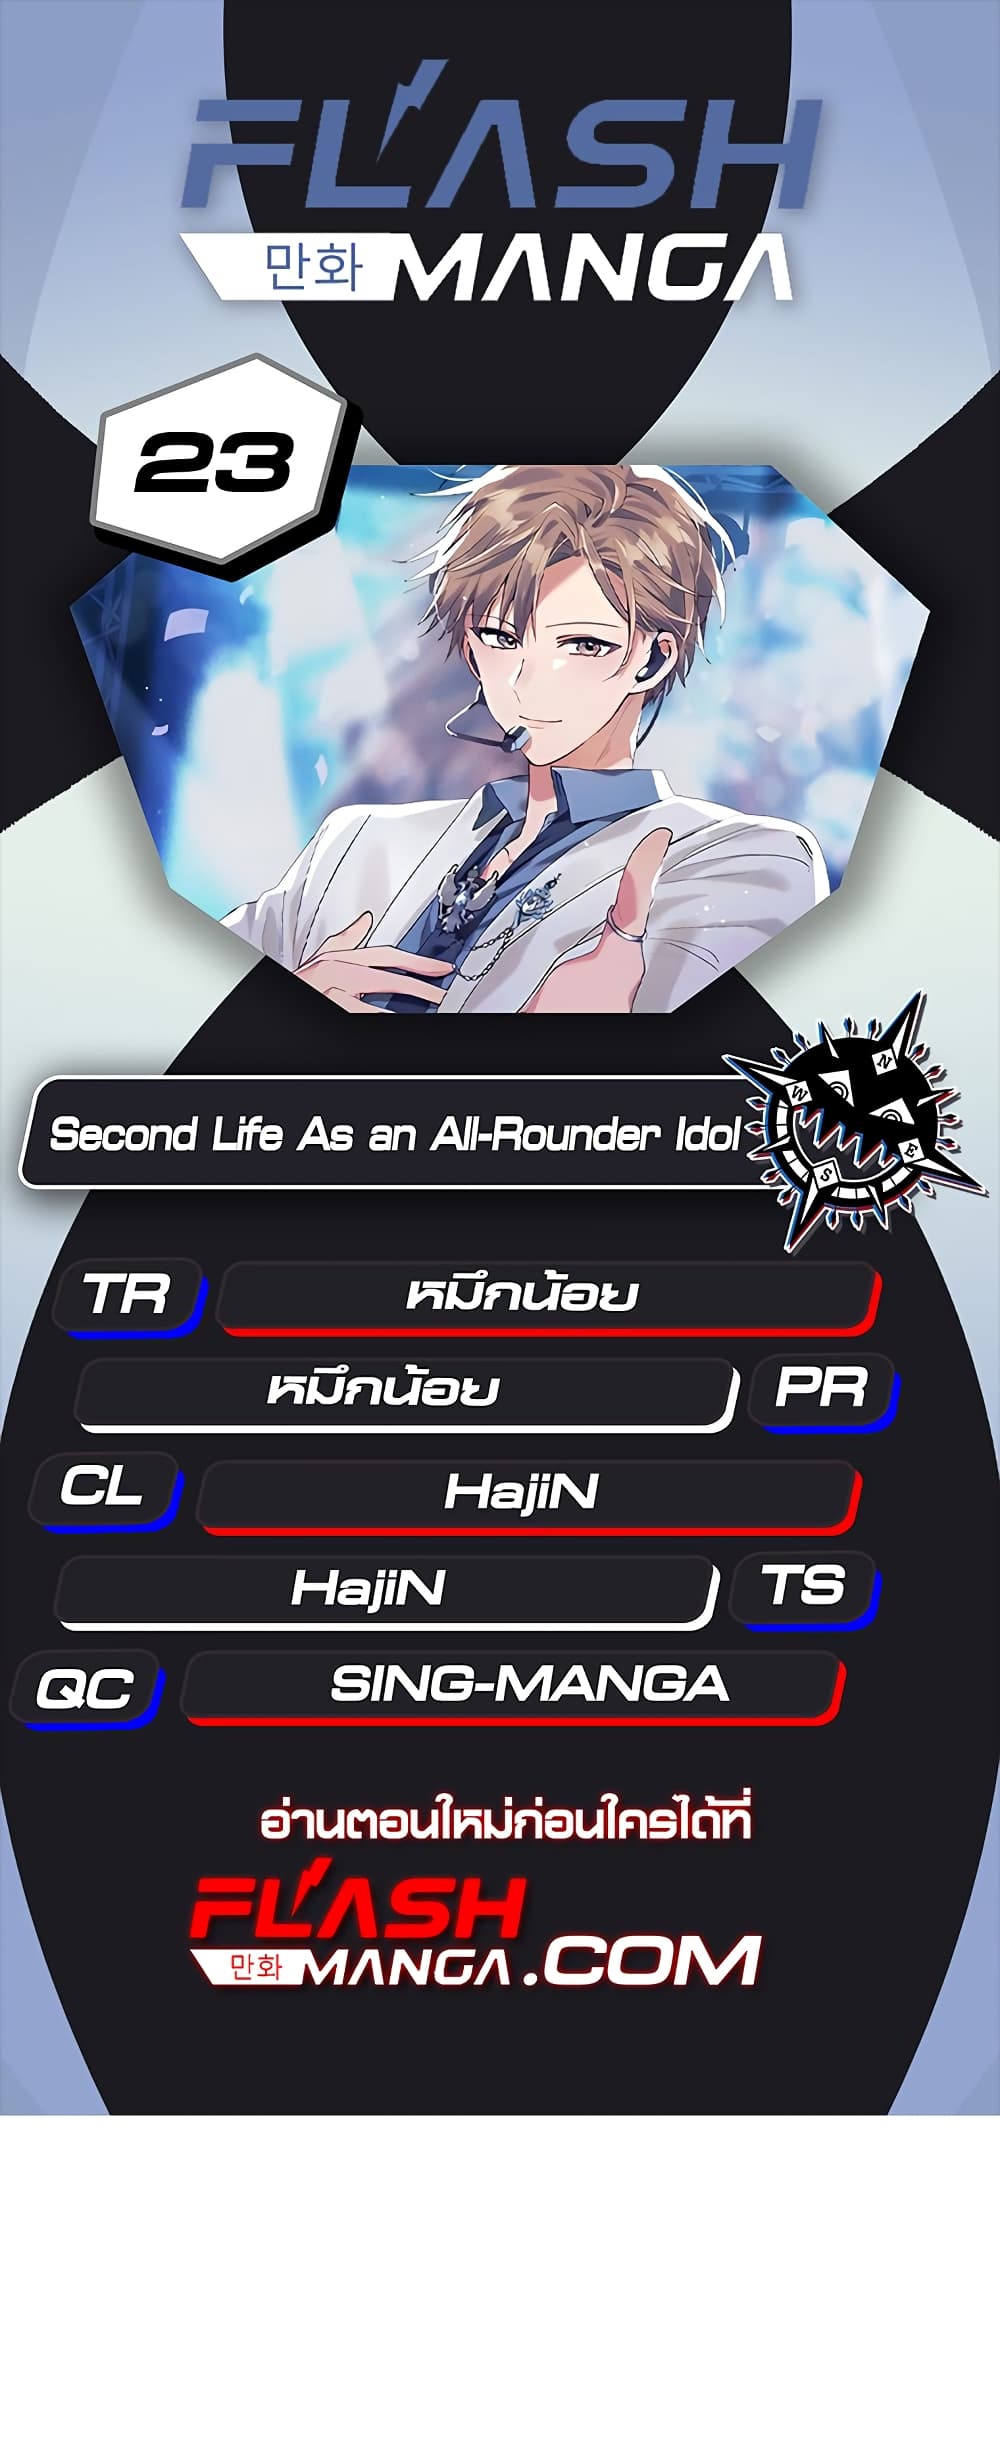 The Second Life of an All-Rounder Idol 22-22